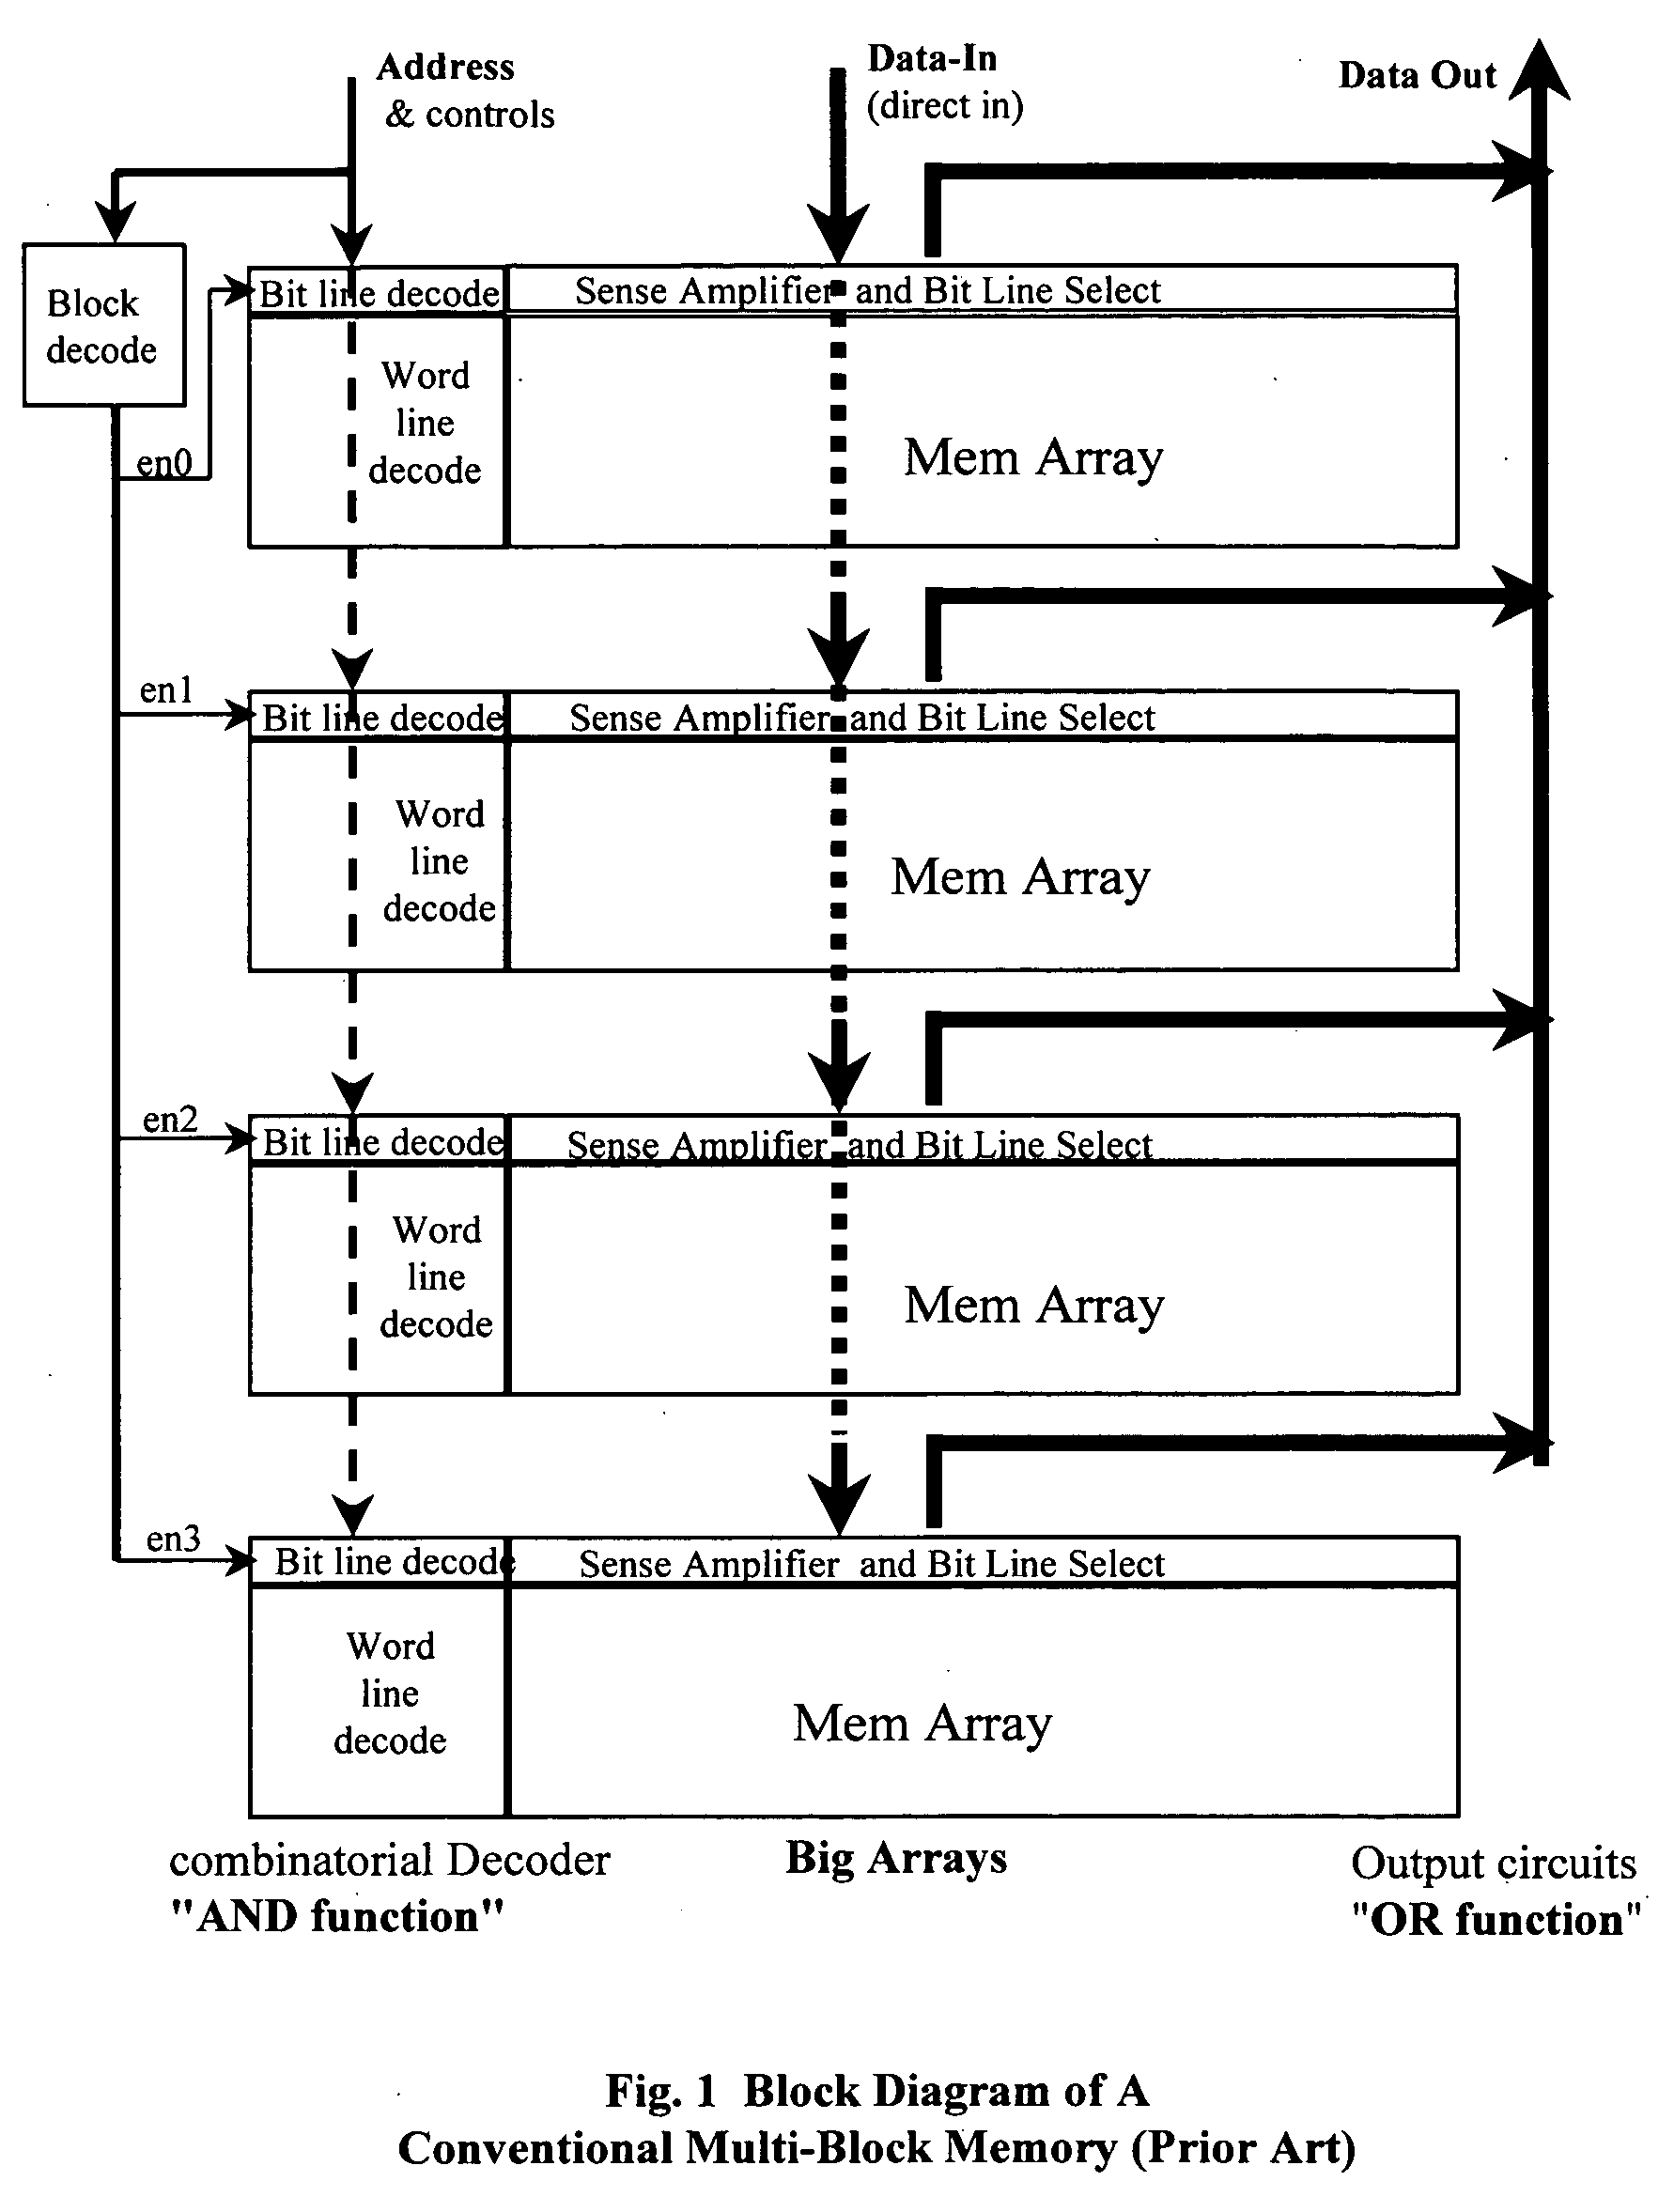 Parallel asynchronous propagation pipeline structure to access multiple memory arrays